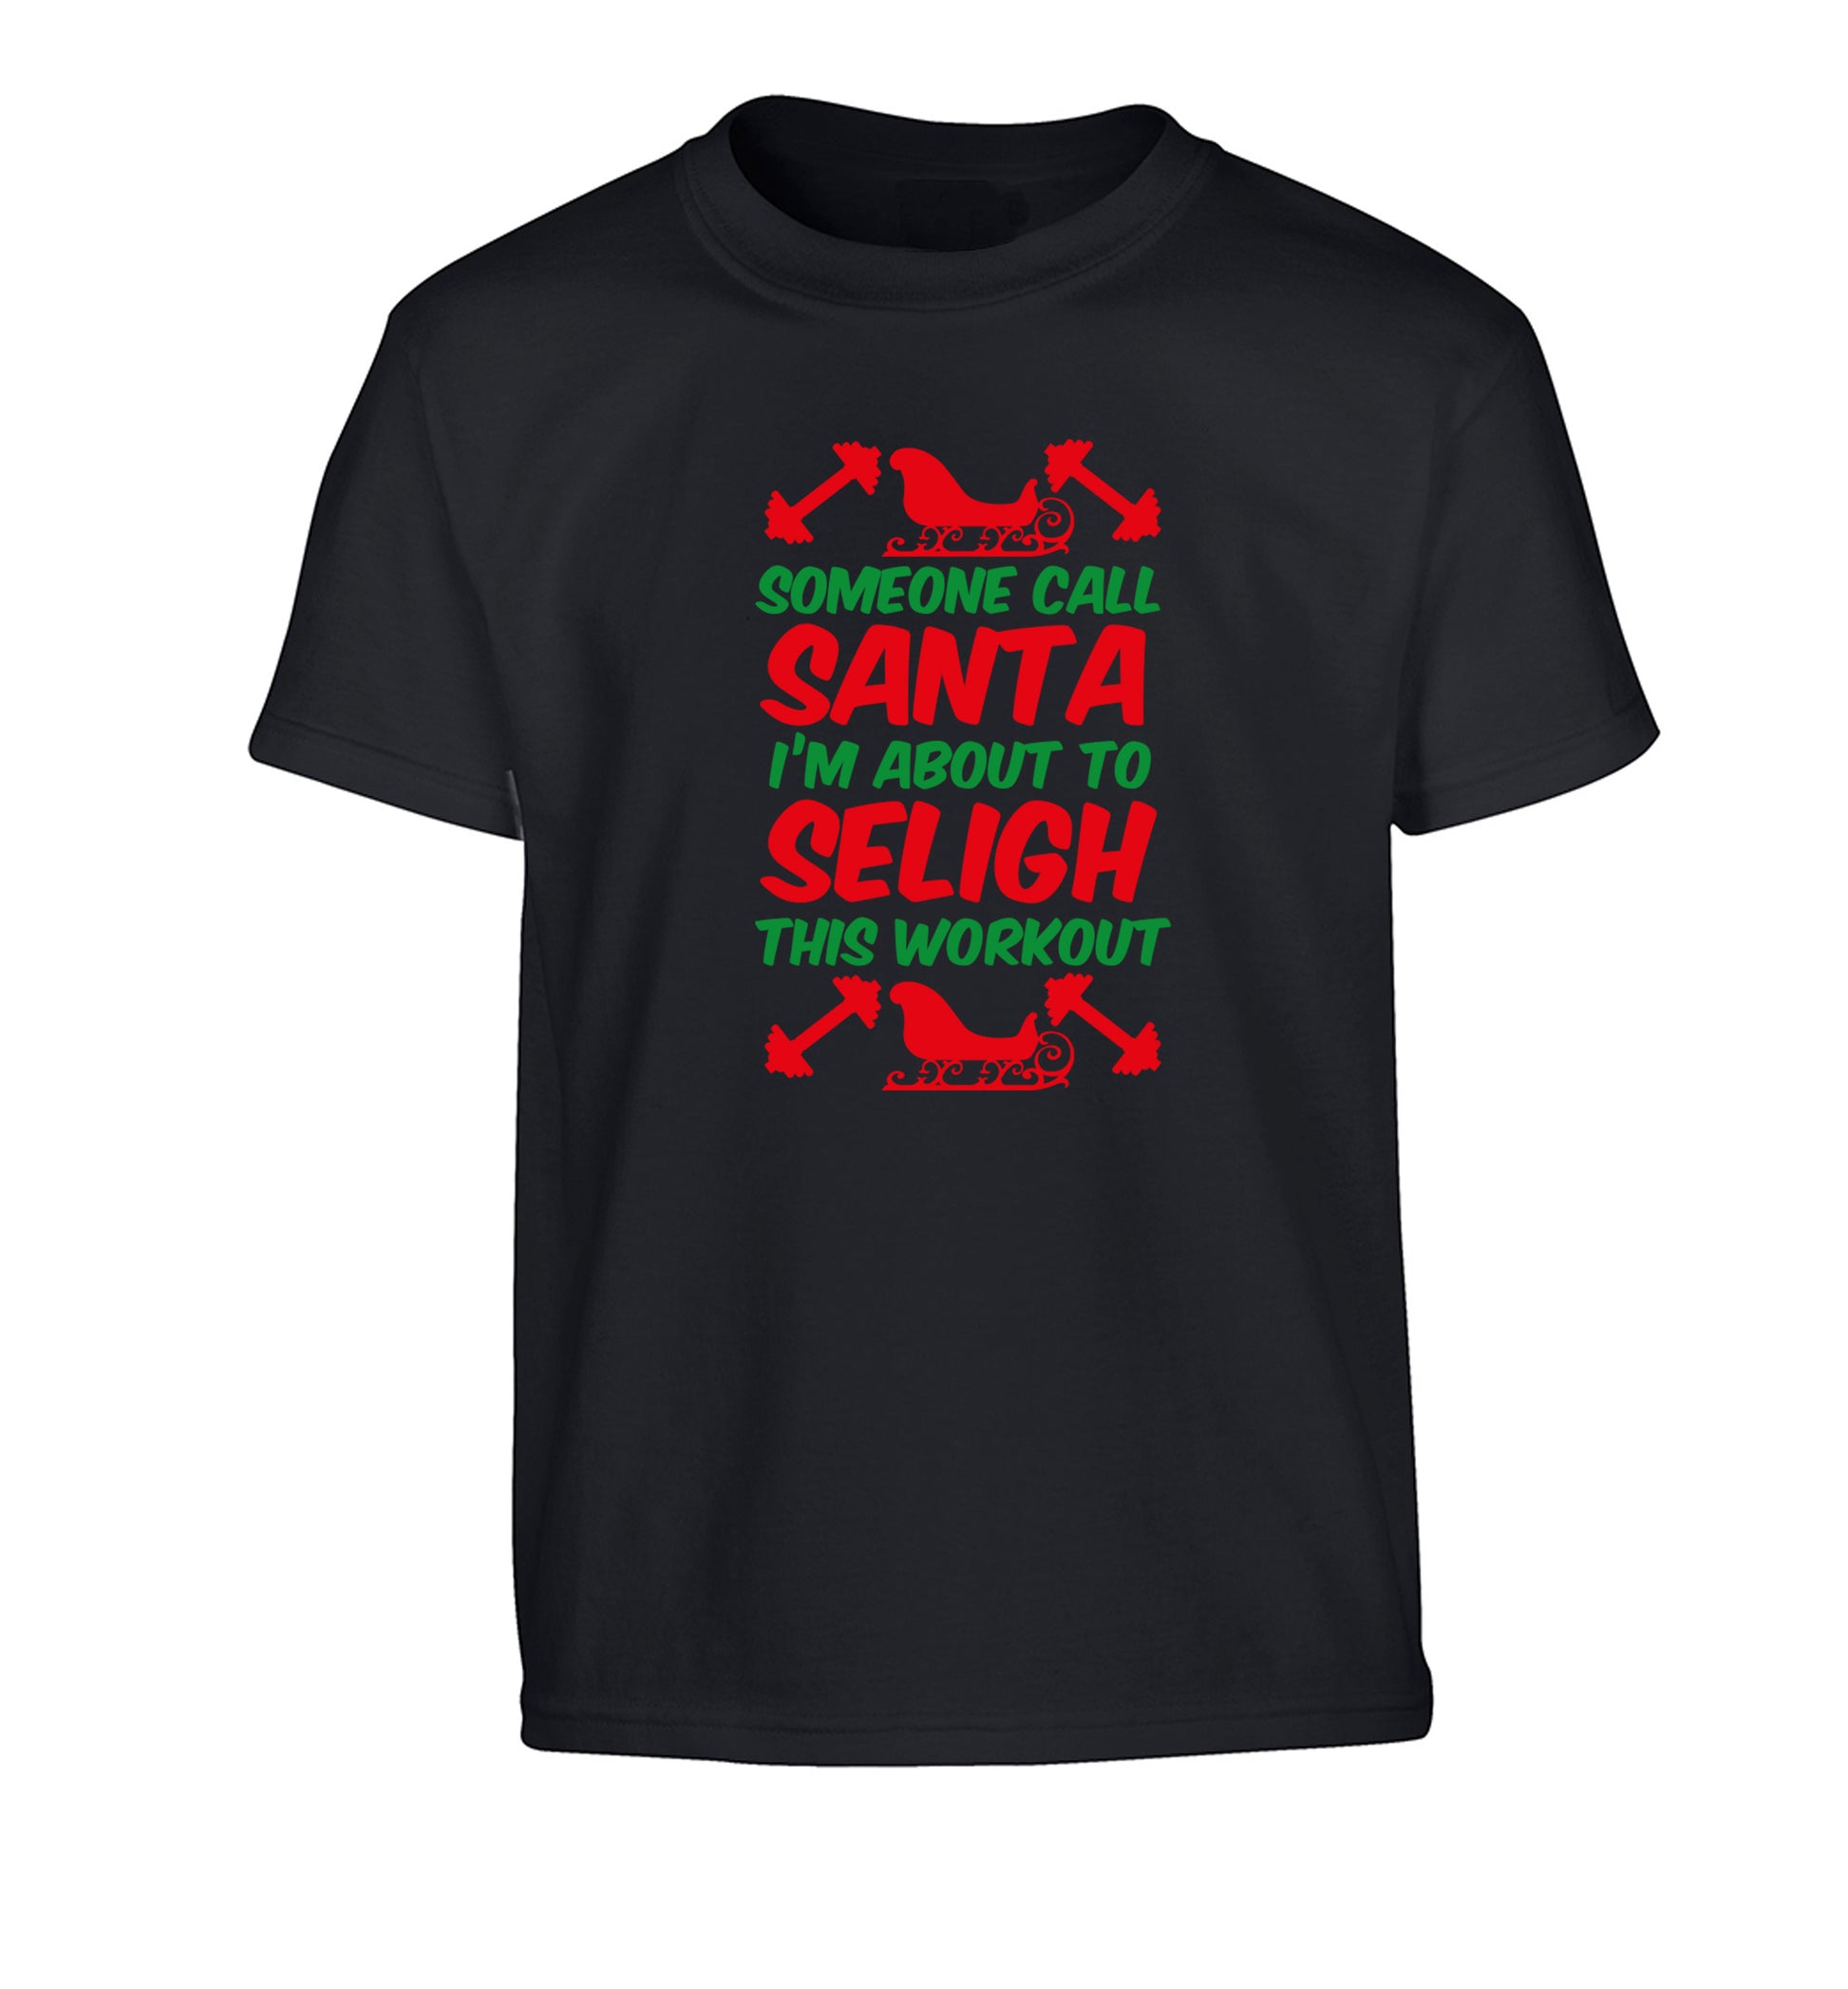 Someone call santa, I'm about to sleigh this workout Children's black Tshirt 12-14 Years